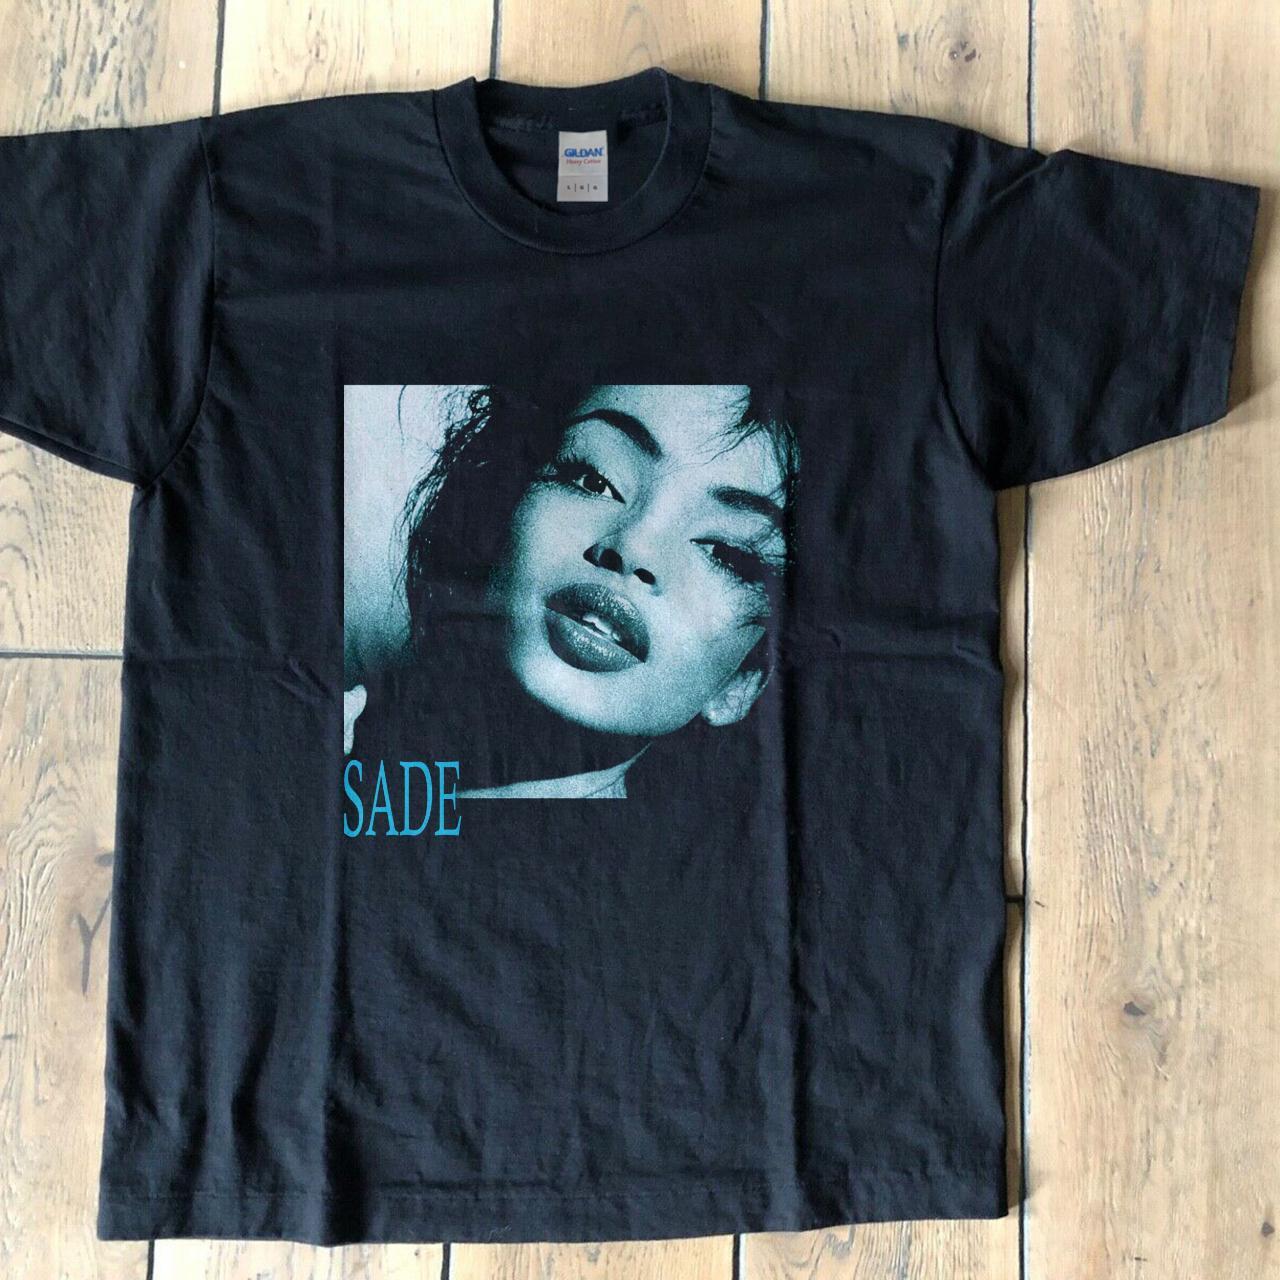 Available in sizes XL Short sleeved SADE T... - Depop